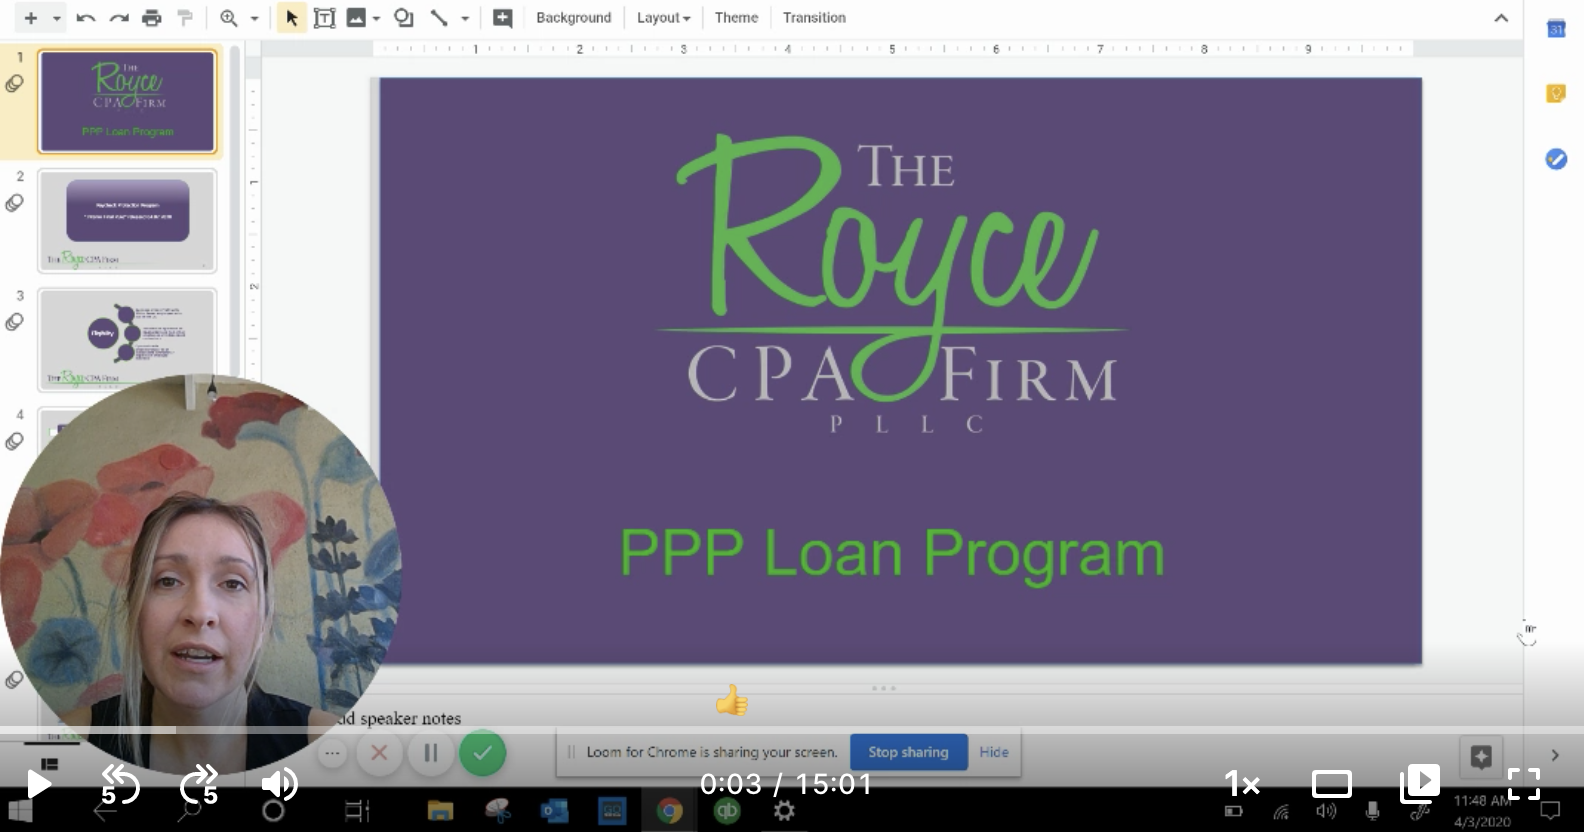 Video Walkthrough Understanding How the PPP Loan Works The Royce CPA